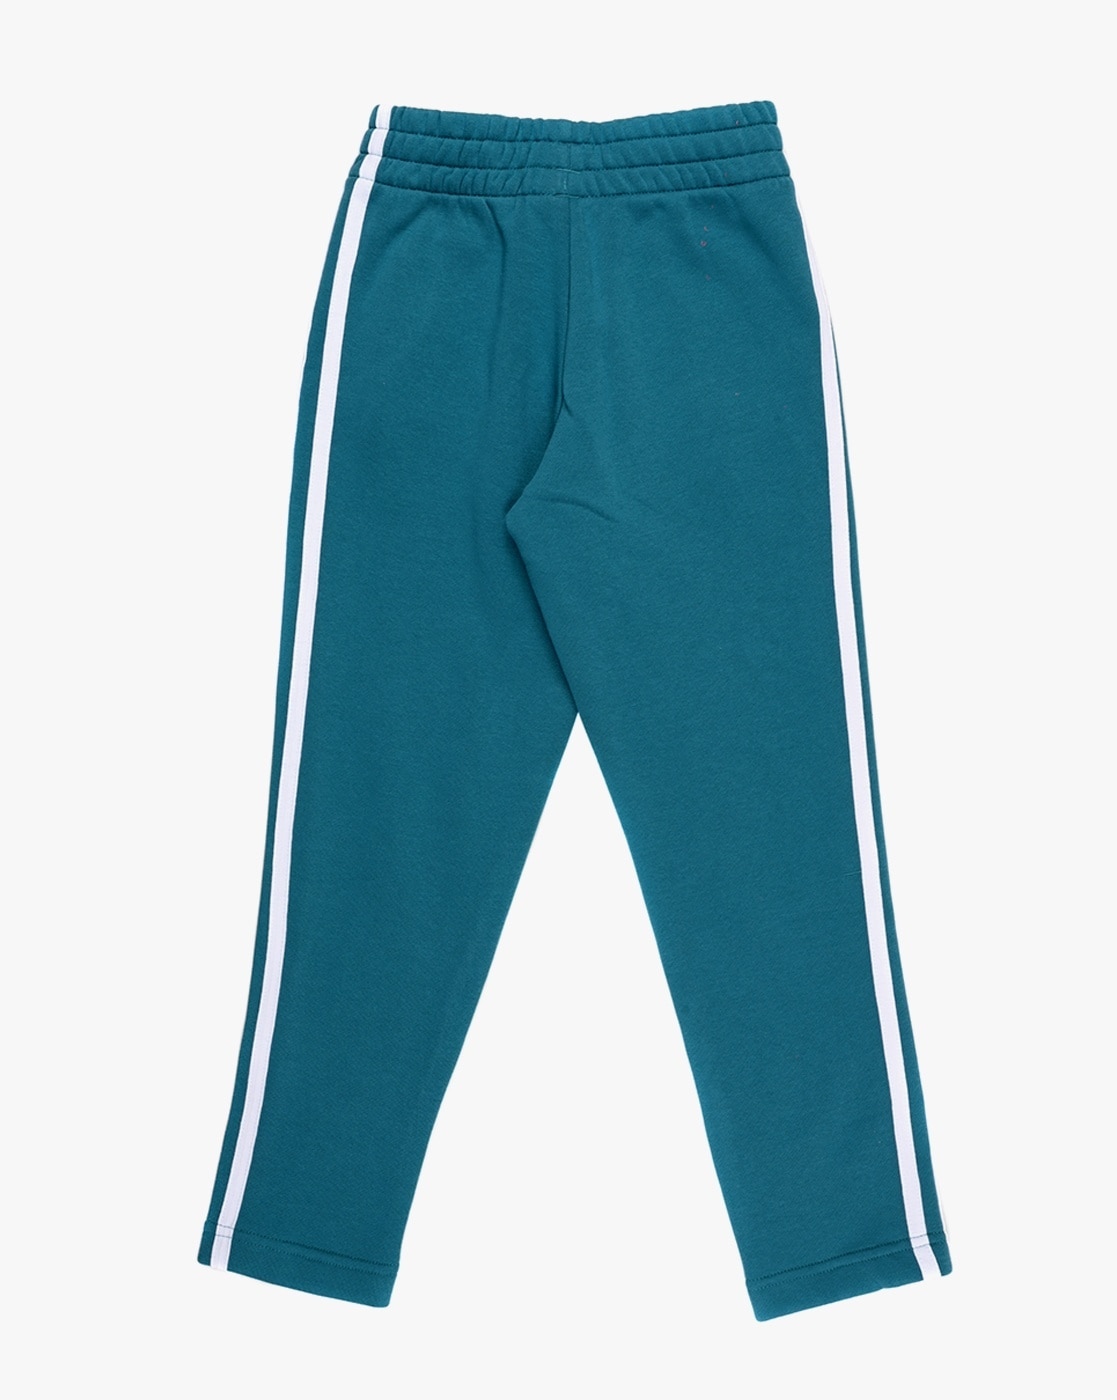 Buy adidas track pants for mens in India @ Limeroad